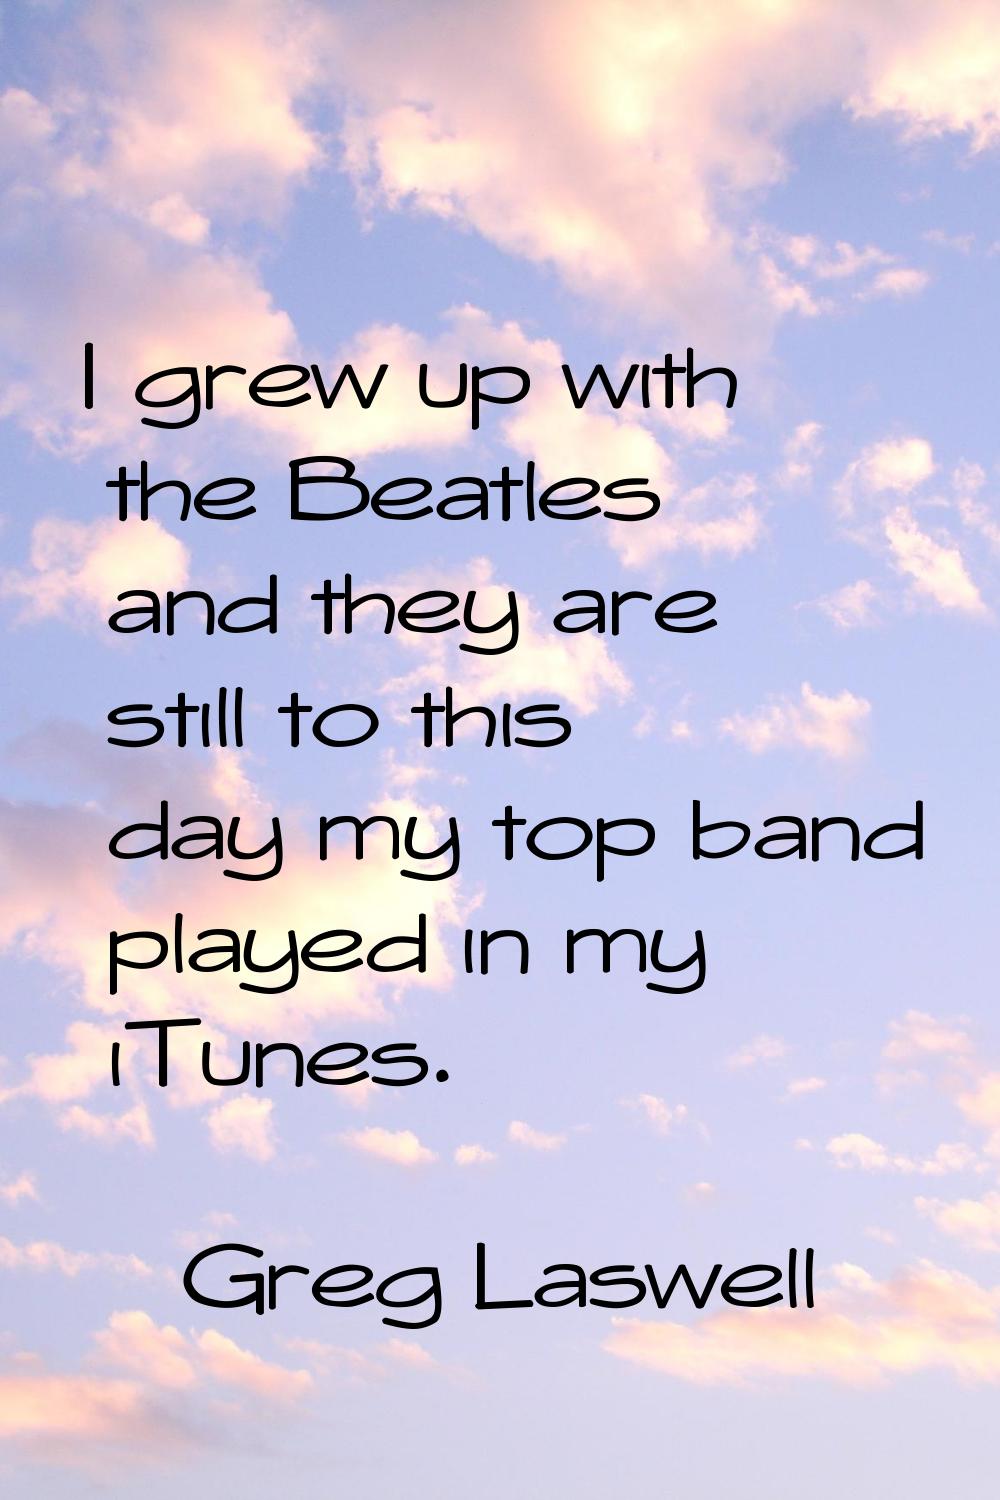 I grew up with the Beatles and they are still to this day my top band played in my iTunes.